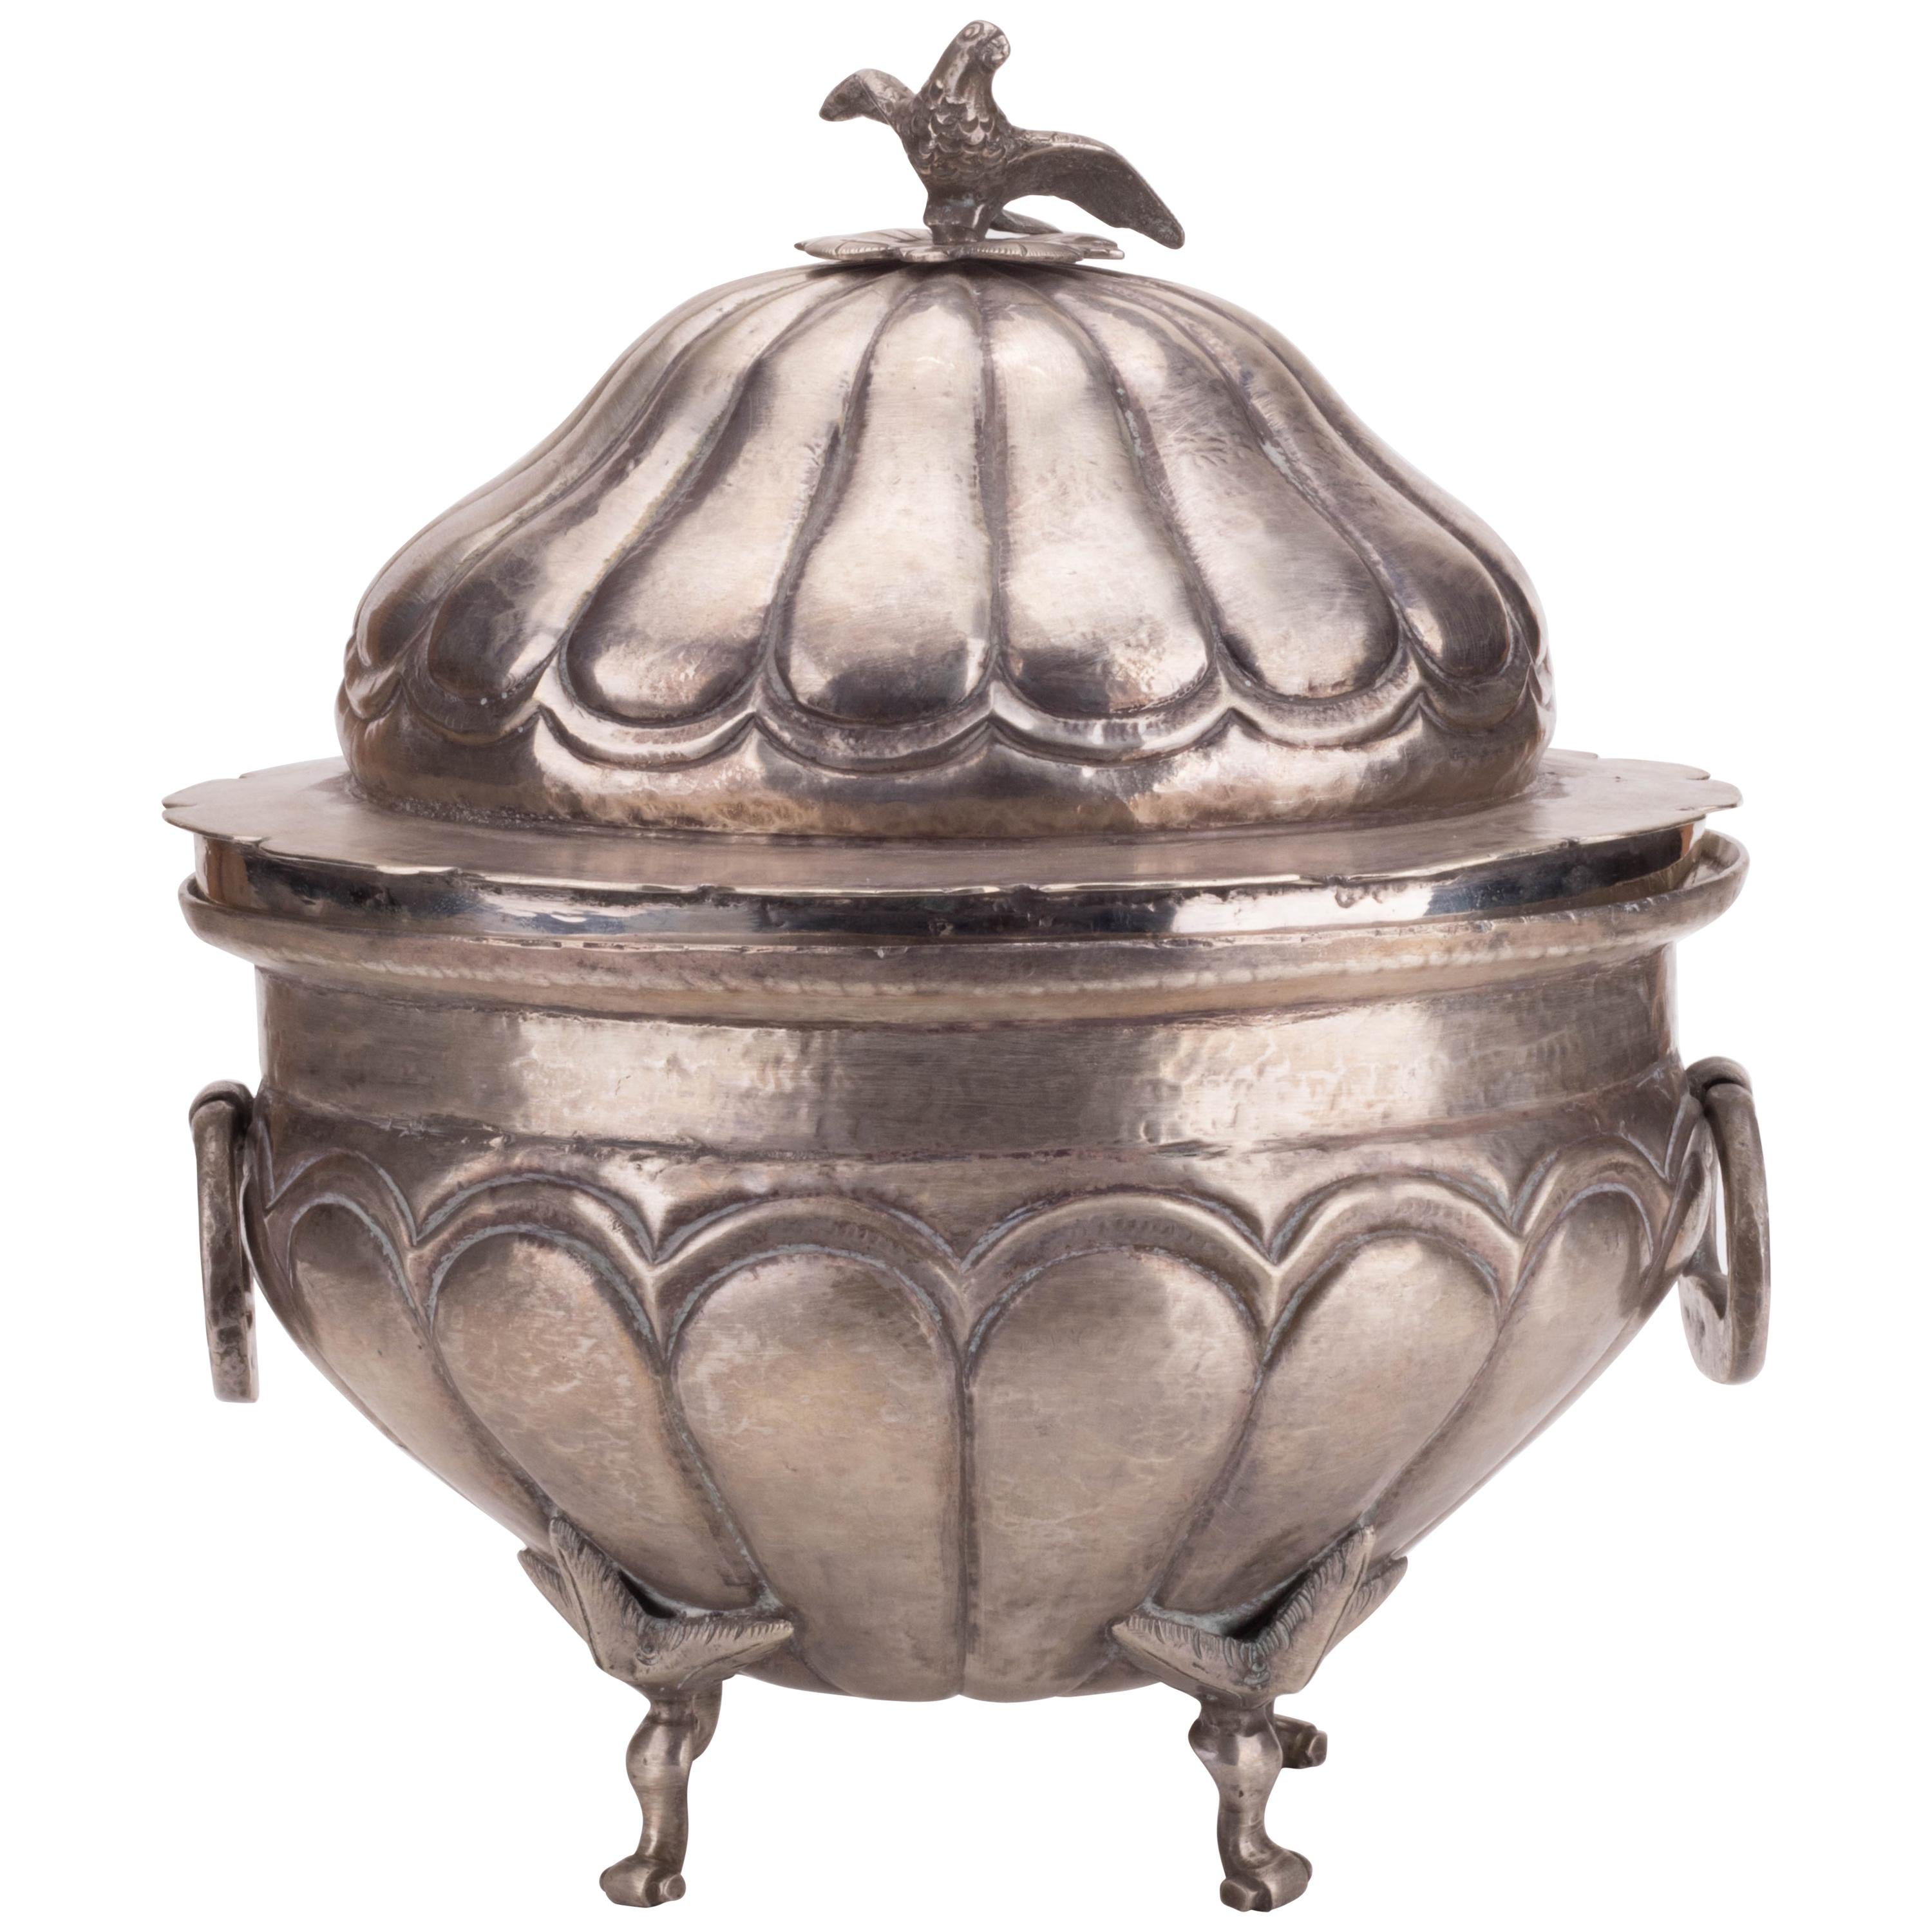 1780s Colonial Peruvian Tureen with Side Handles and Dove Shaped Knob on Lid